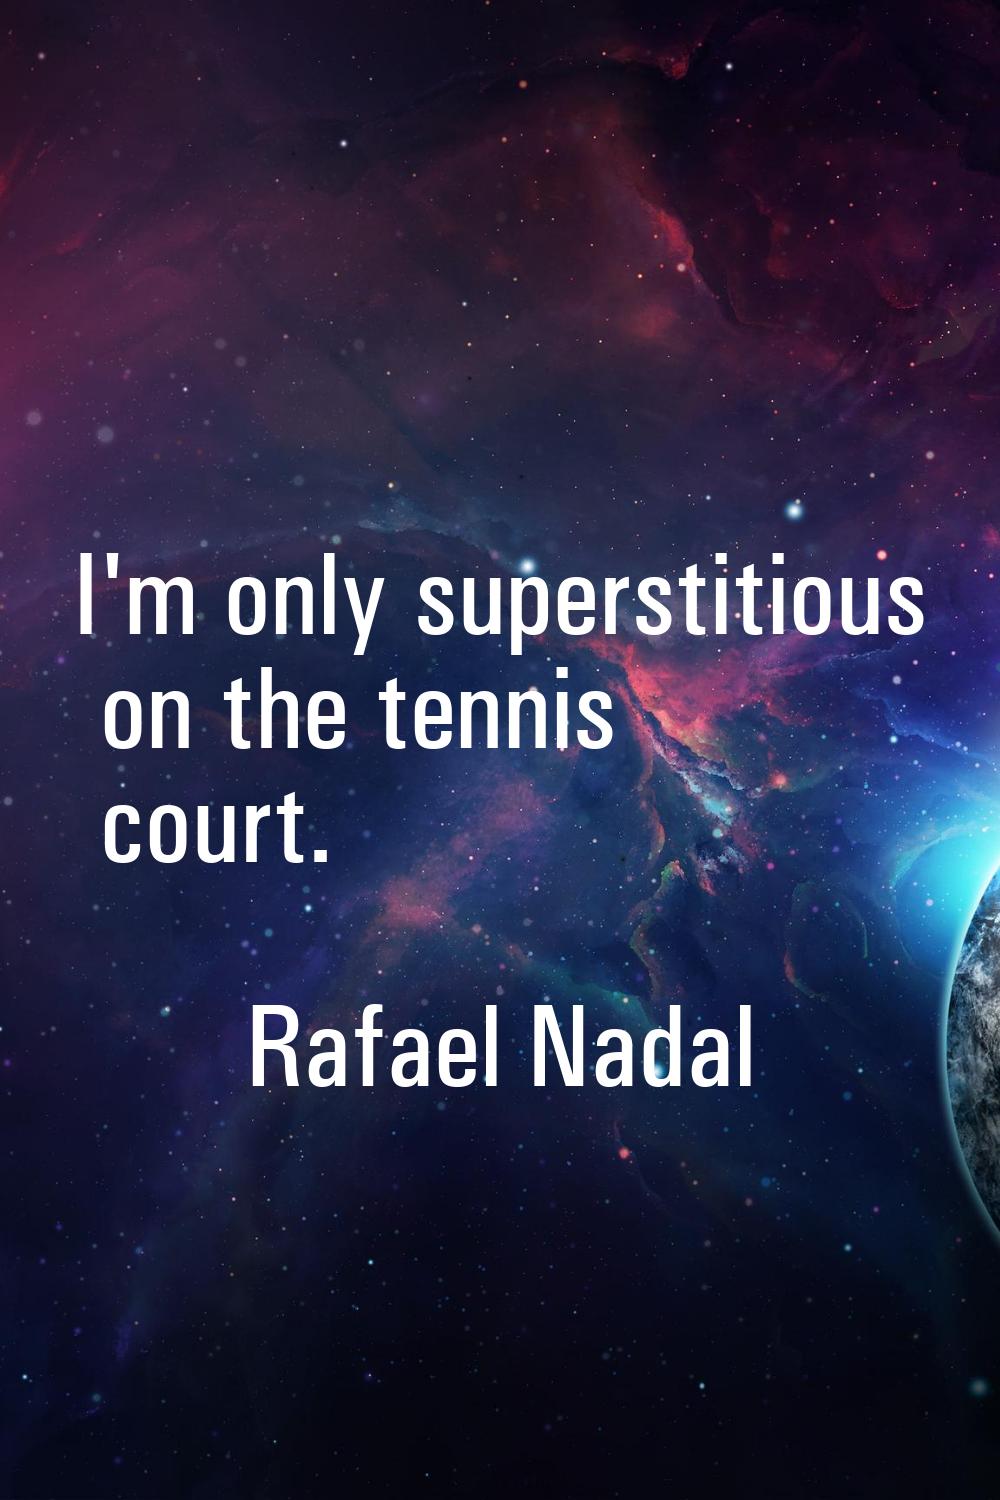 I'm only superstitious on the tennis court.